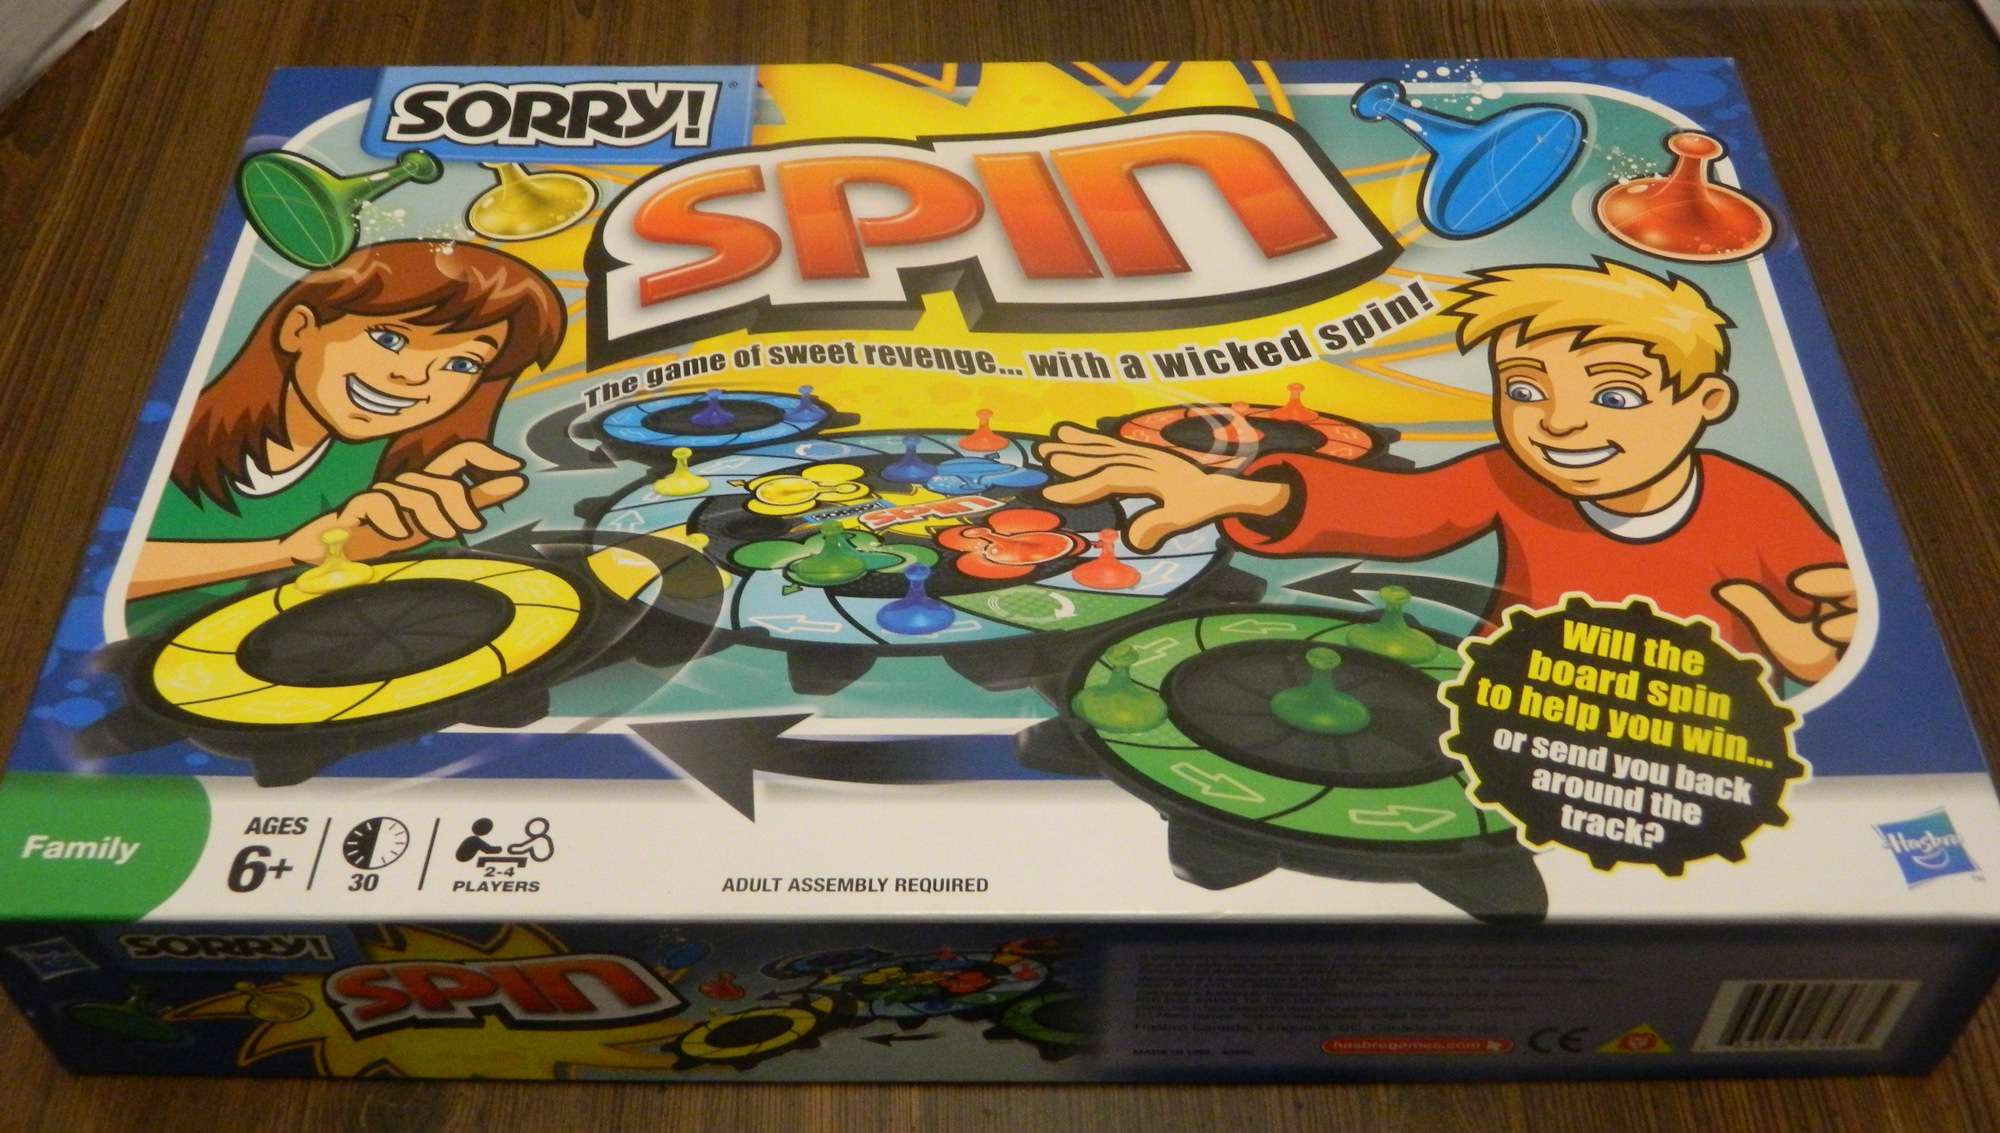 Sorry! Spin Board Game Review and Instructions